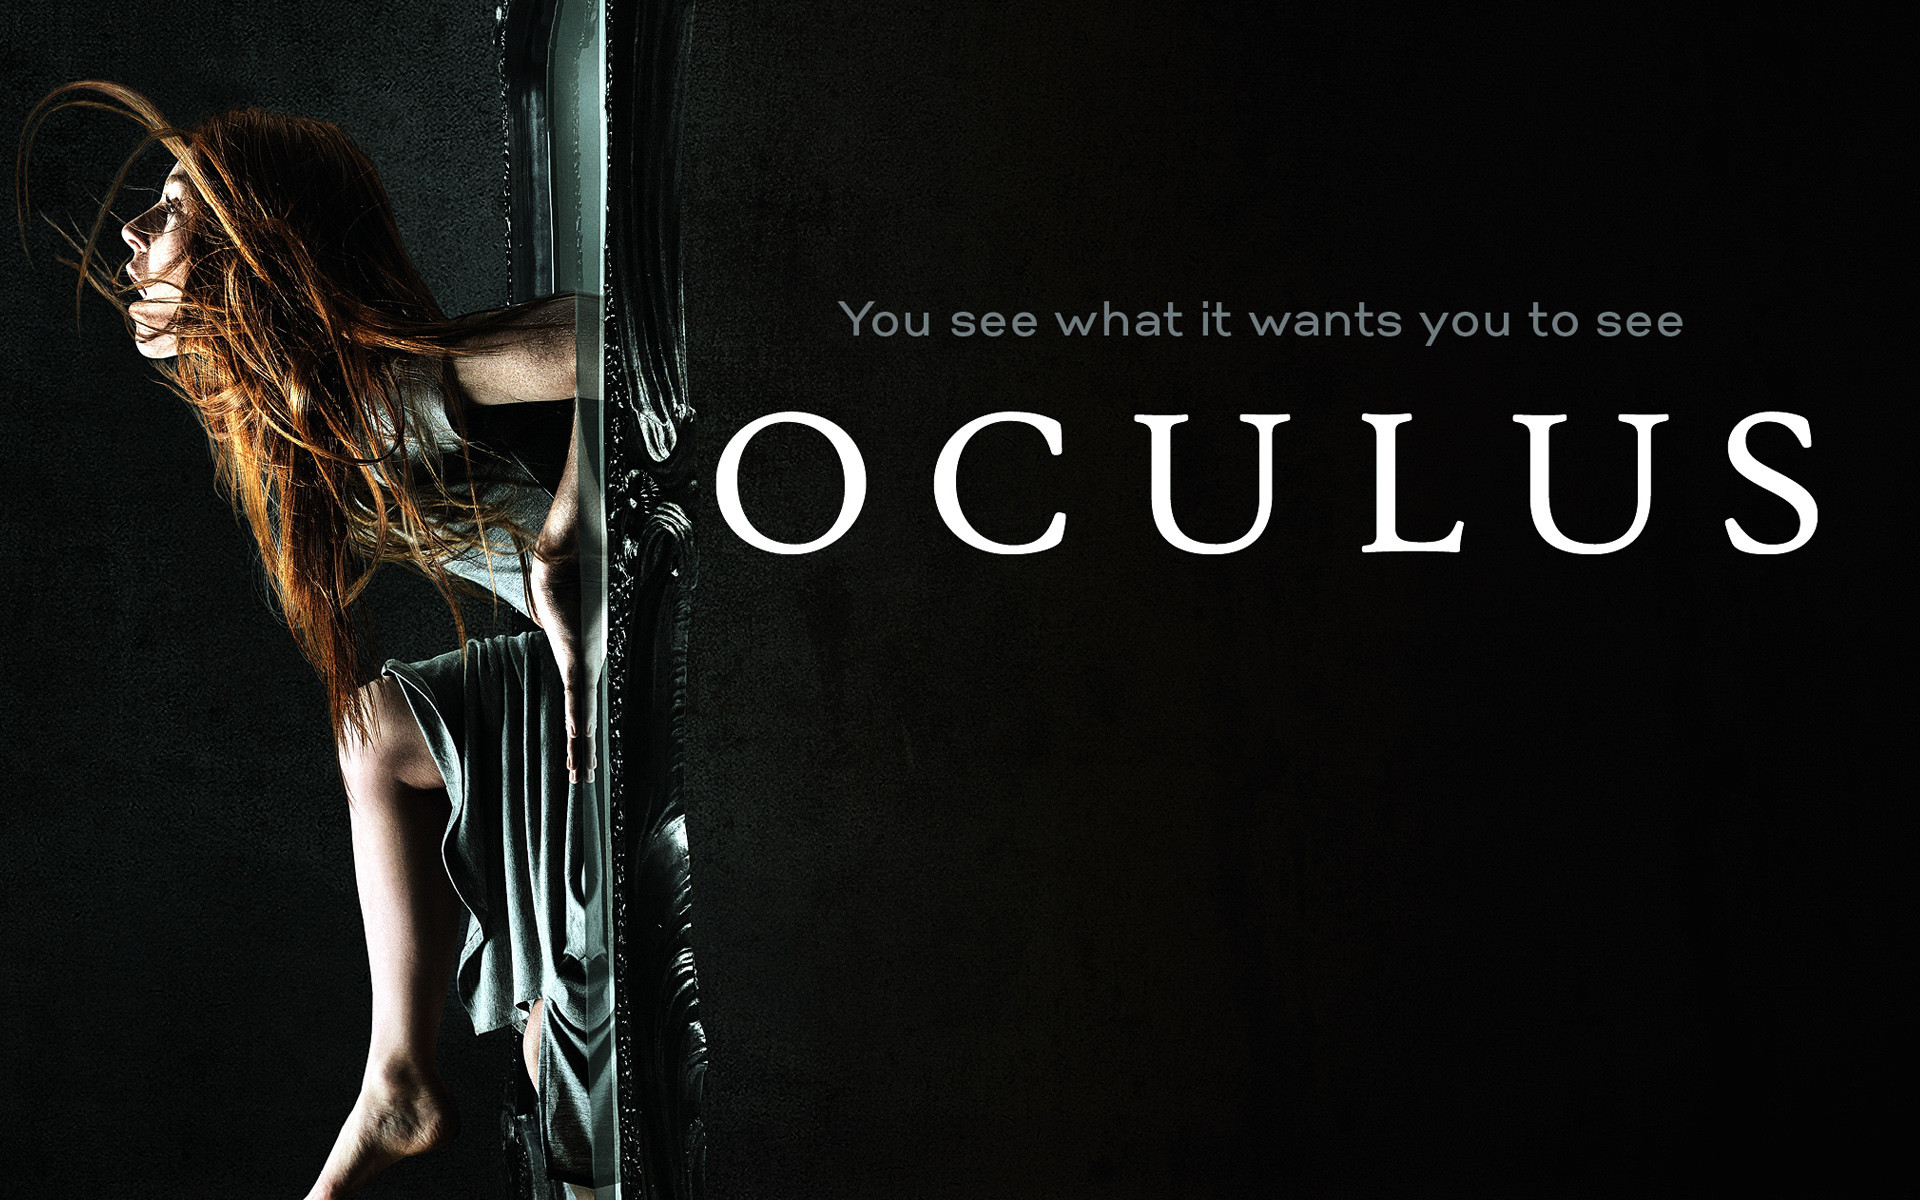 Oculus 2014 Horror Movie Wallpapers | HD Wallpapers